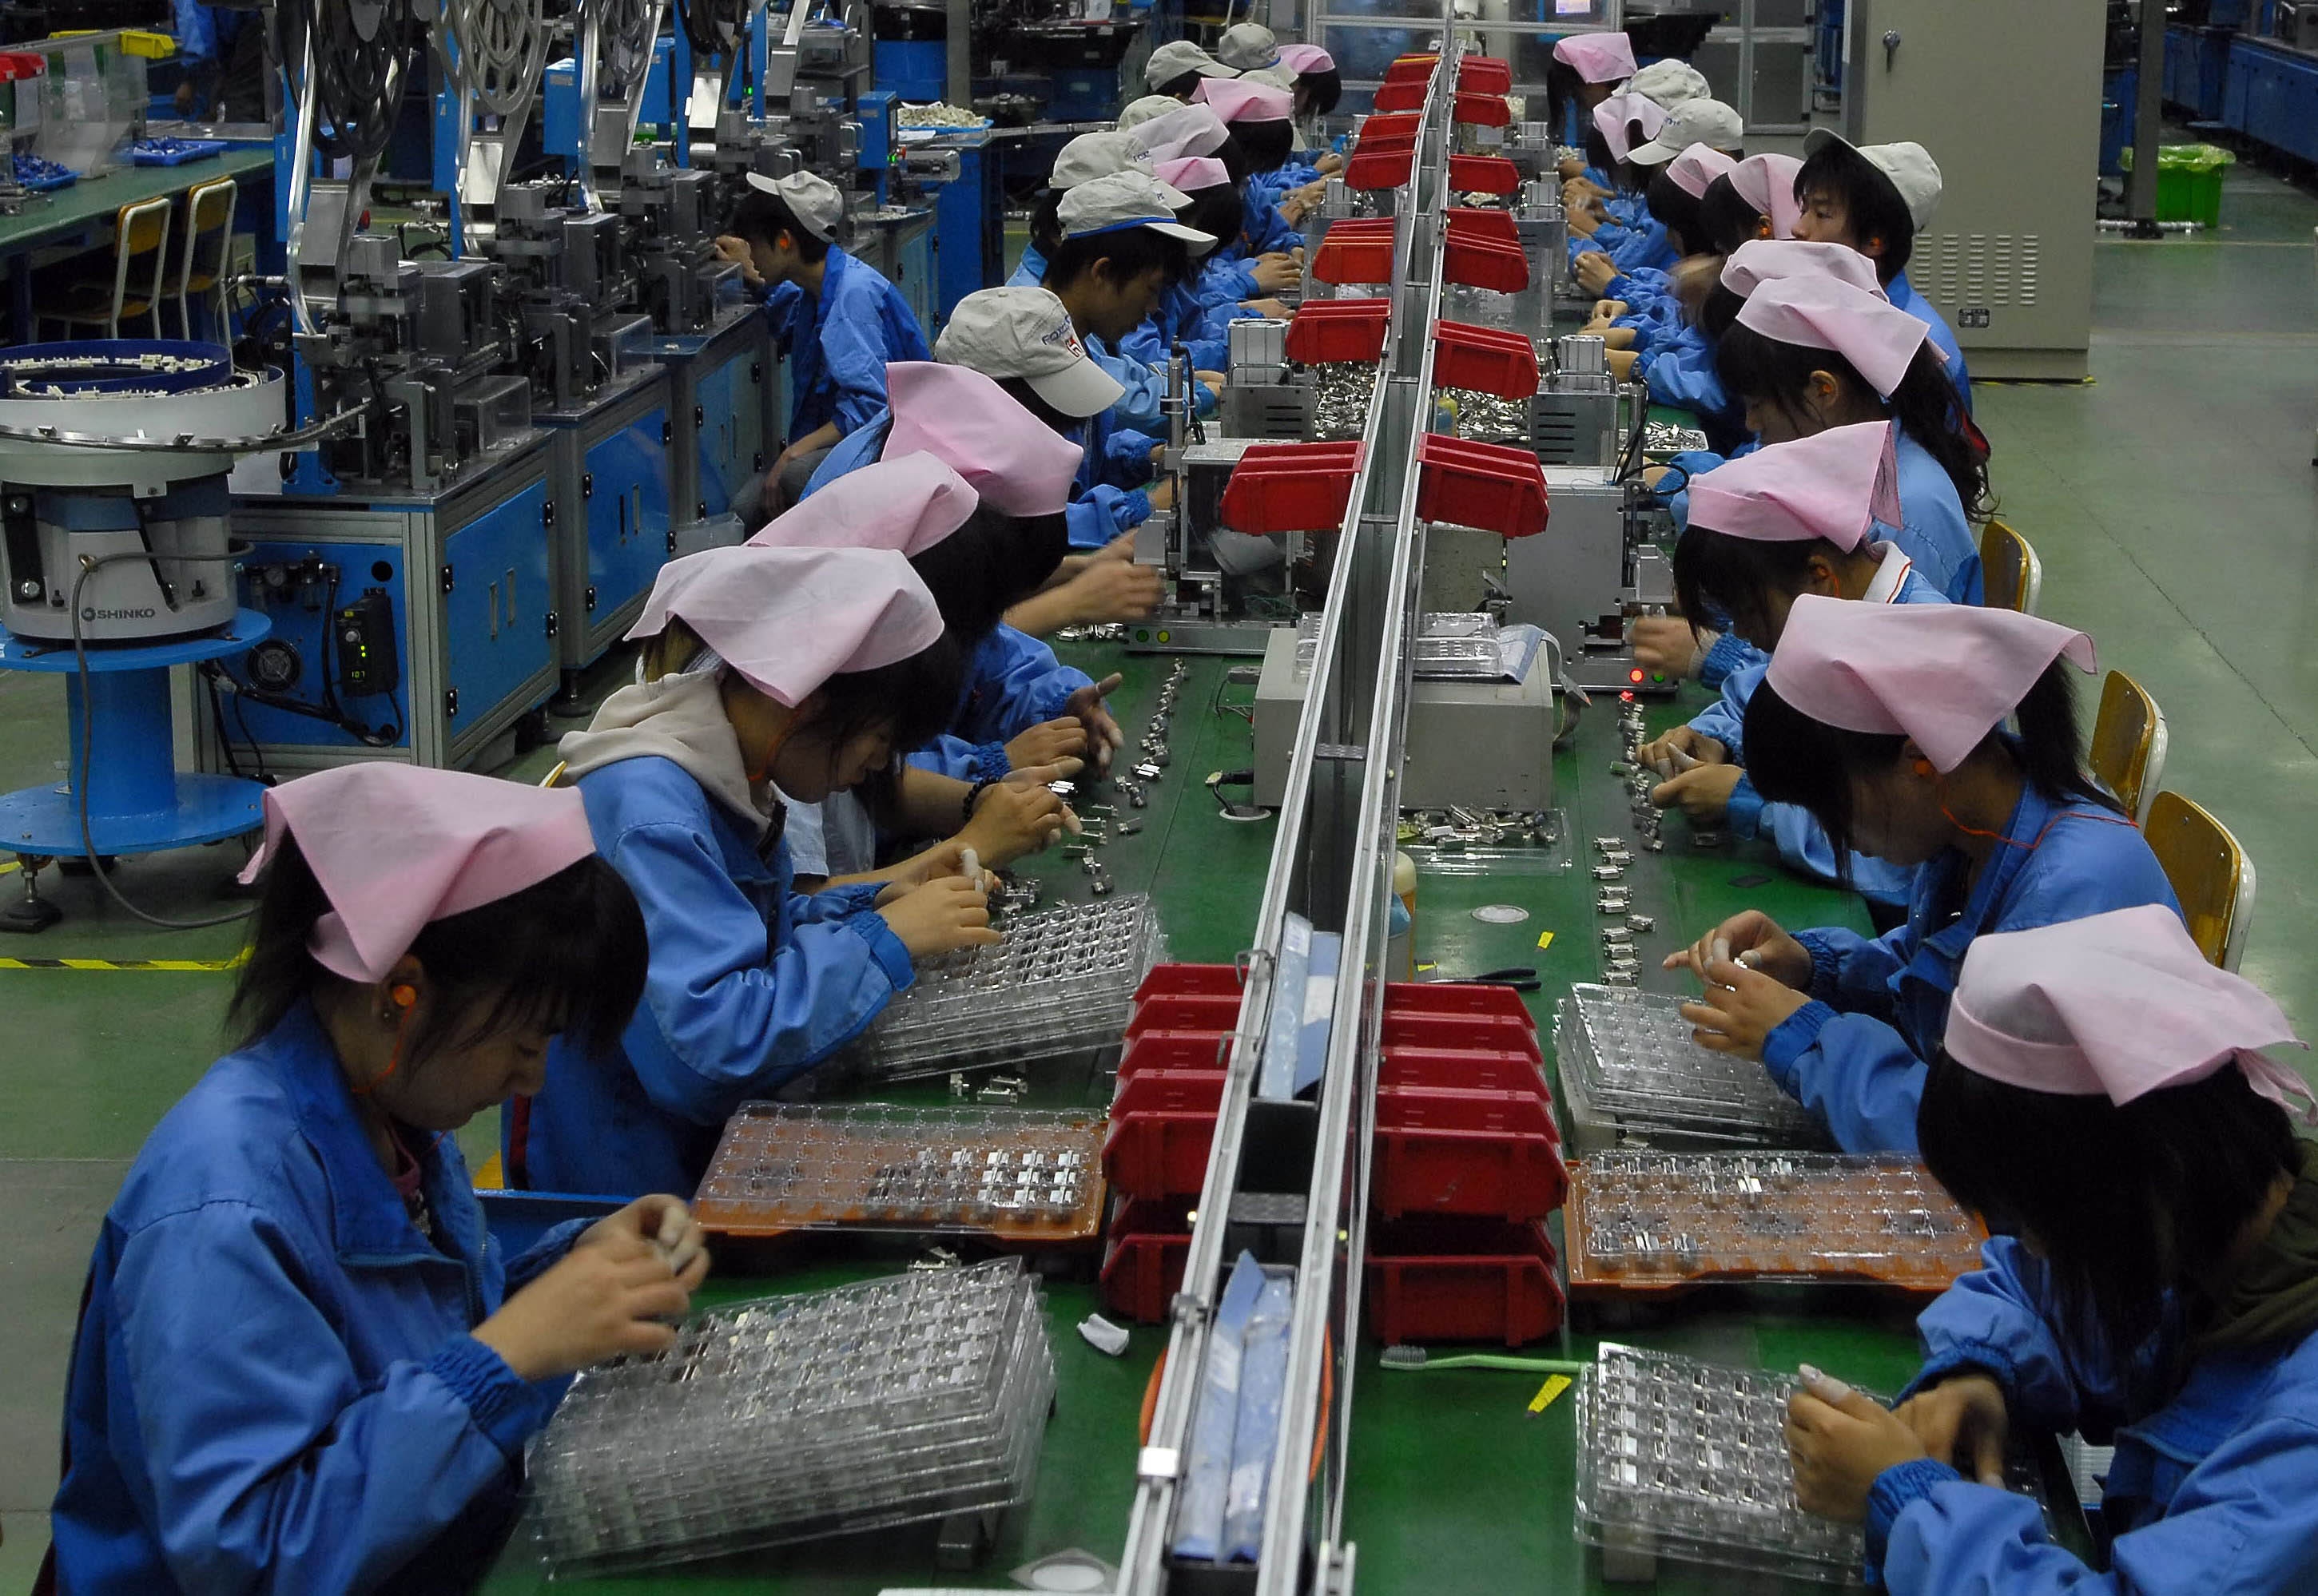 Workers at an IT factory in Huinan, China.